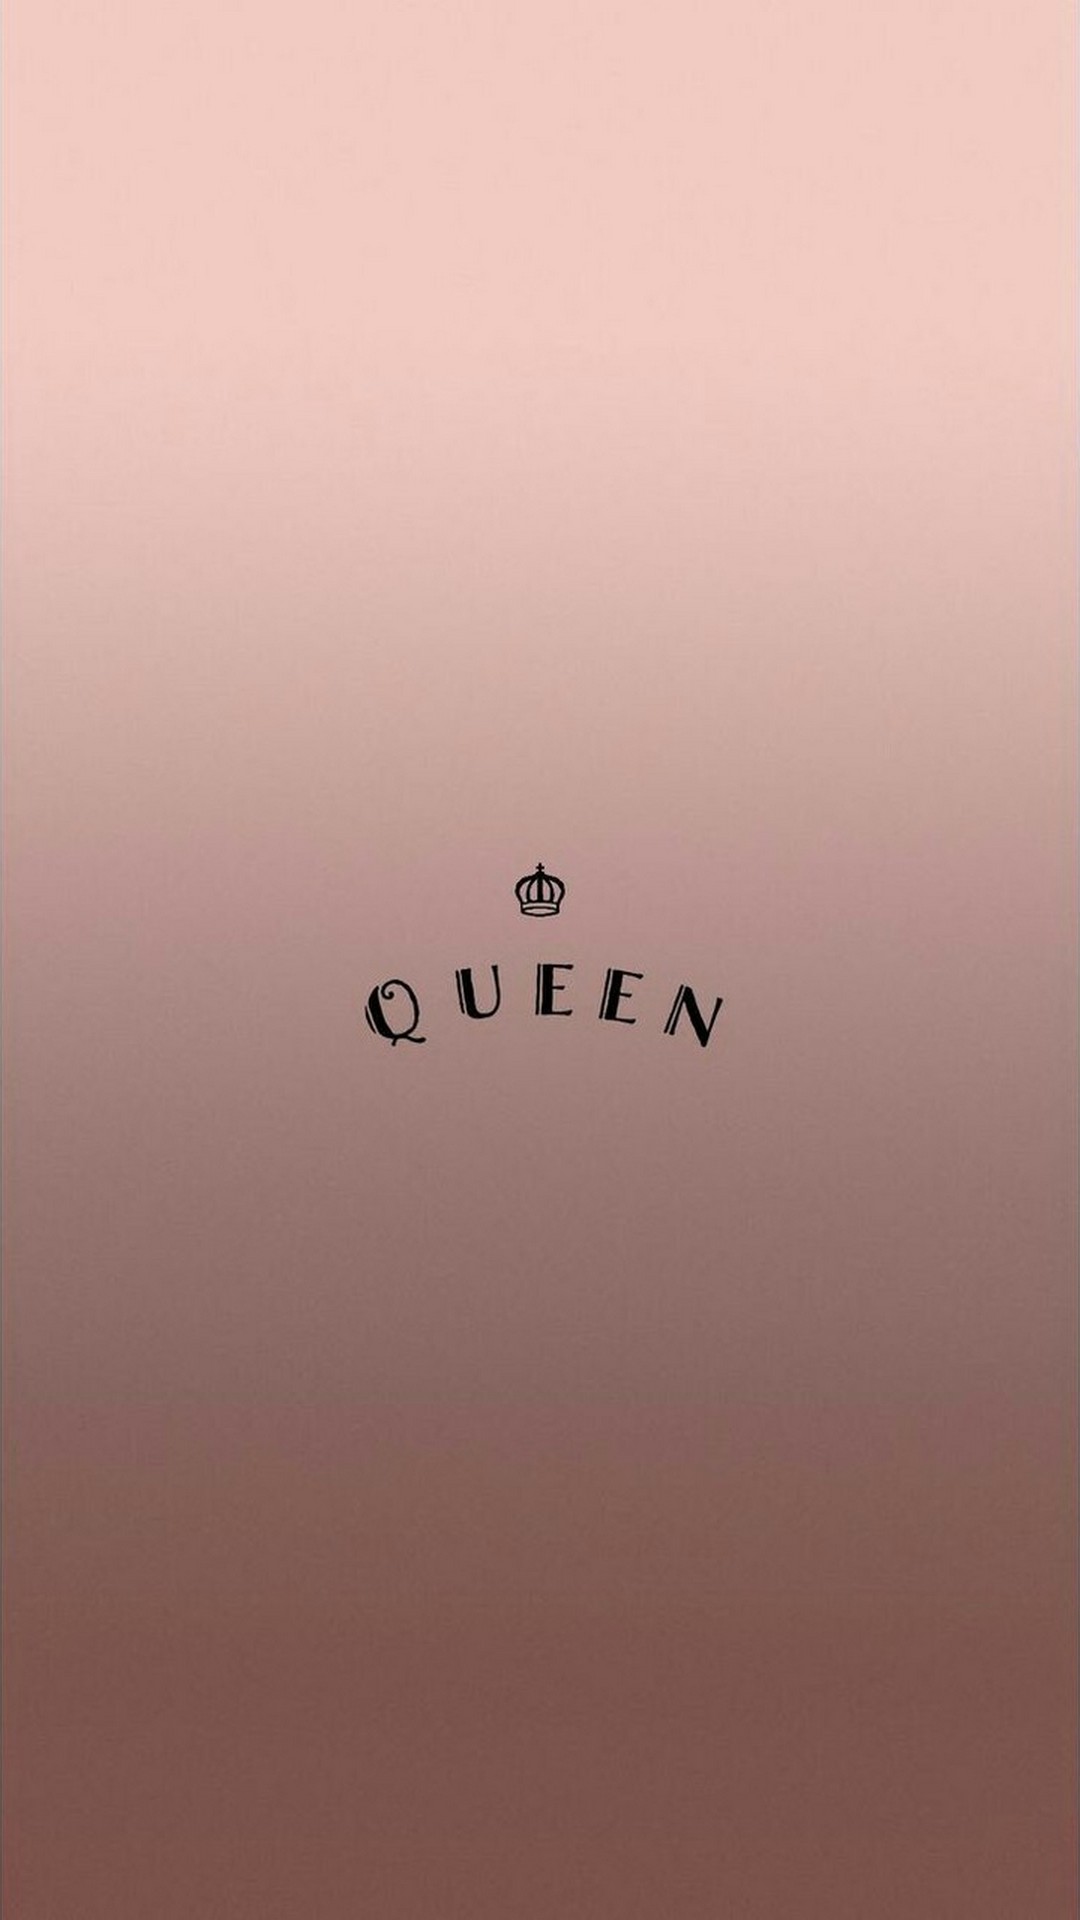 Rose Gold Aesthetic Wallpaper Phone with high-resolution 1080x1920 pixel. You can use and set as wallpaper for Notebook Screensavers, Mac Wallpapers, Mobile Home Screen, iPhone or Android Phones Lock Screen